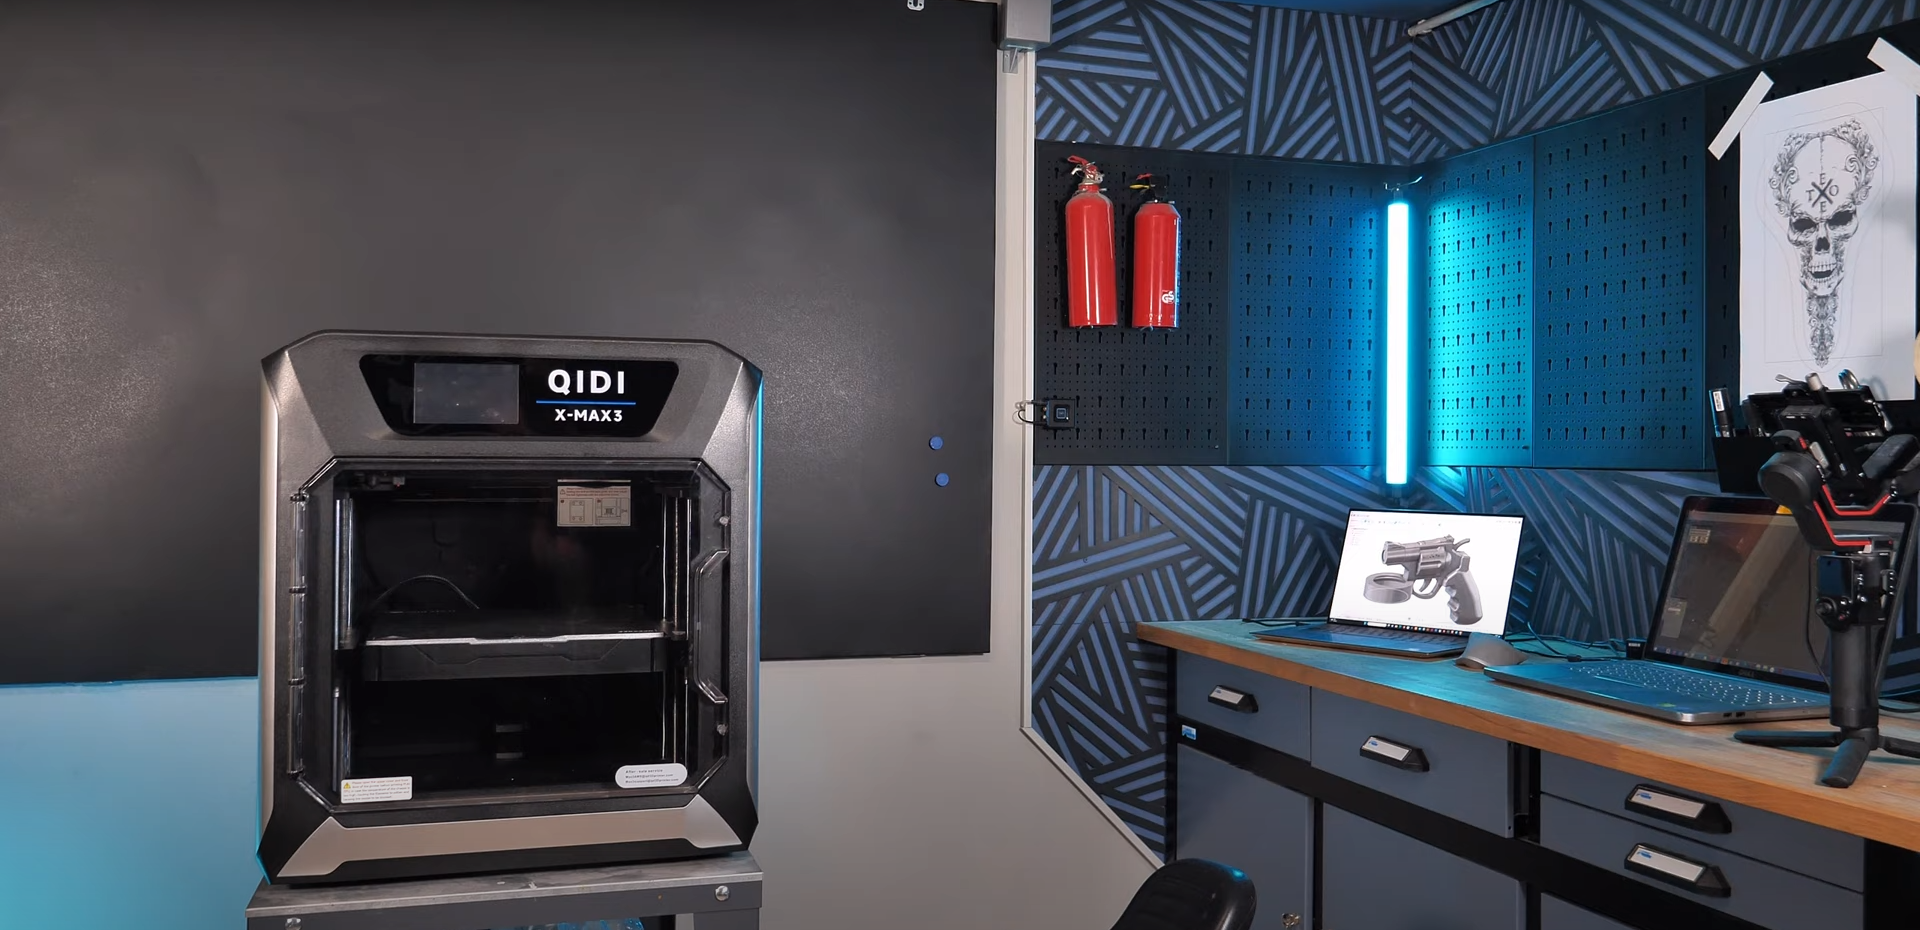 Is Your 3D Printer Noisy? Find Out Why and How to Fix It